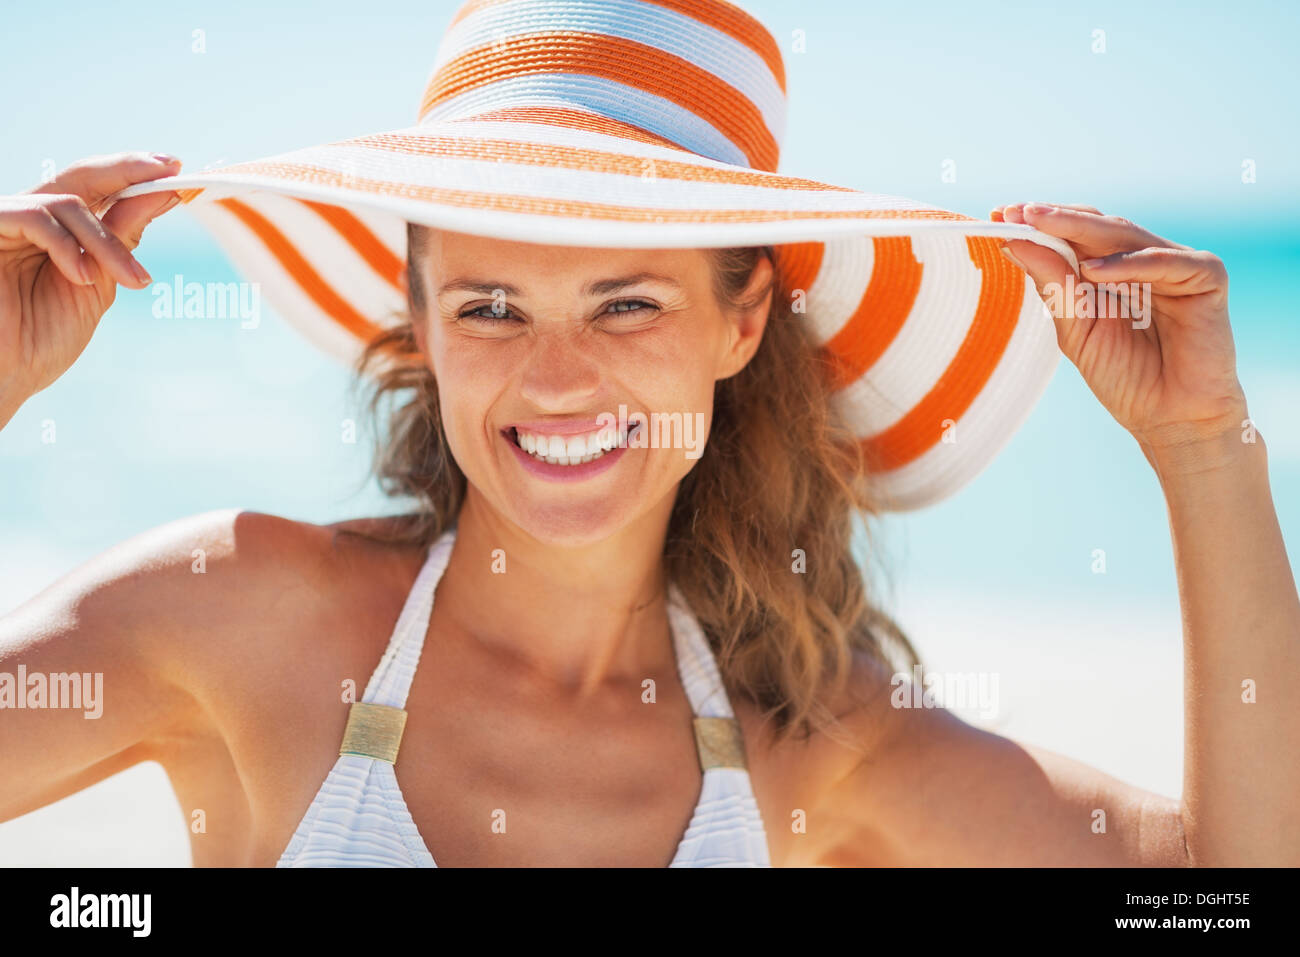 Portrait of smiling young woman in swimsuit and beach hat Stock Photo